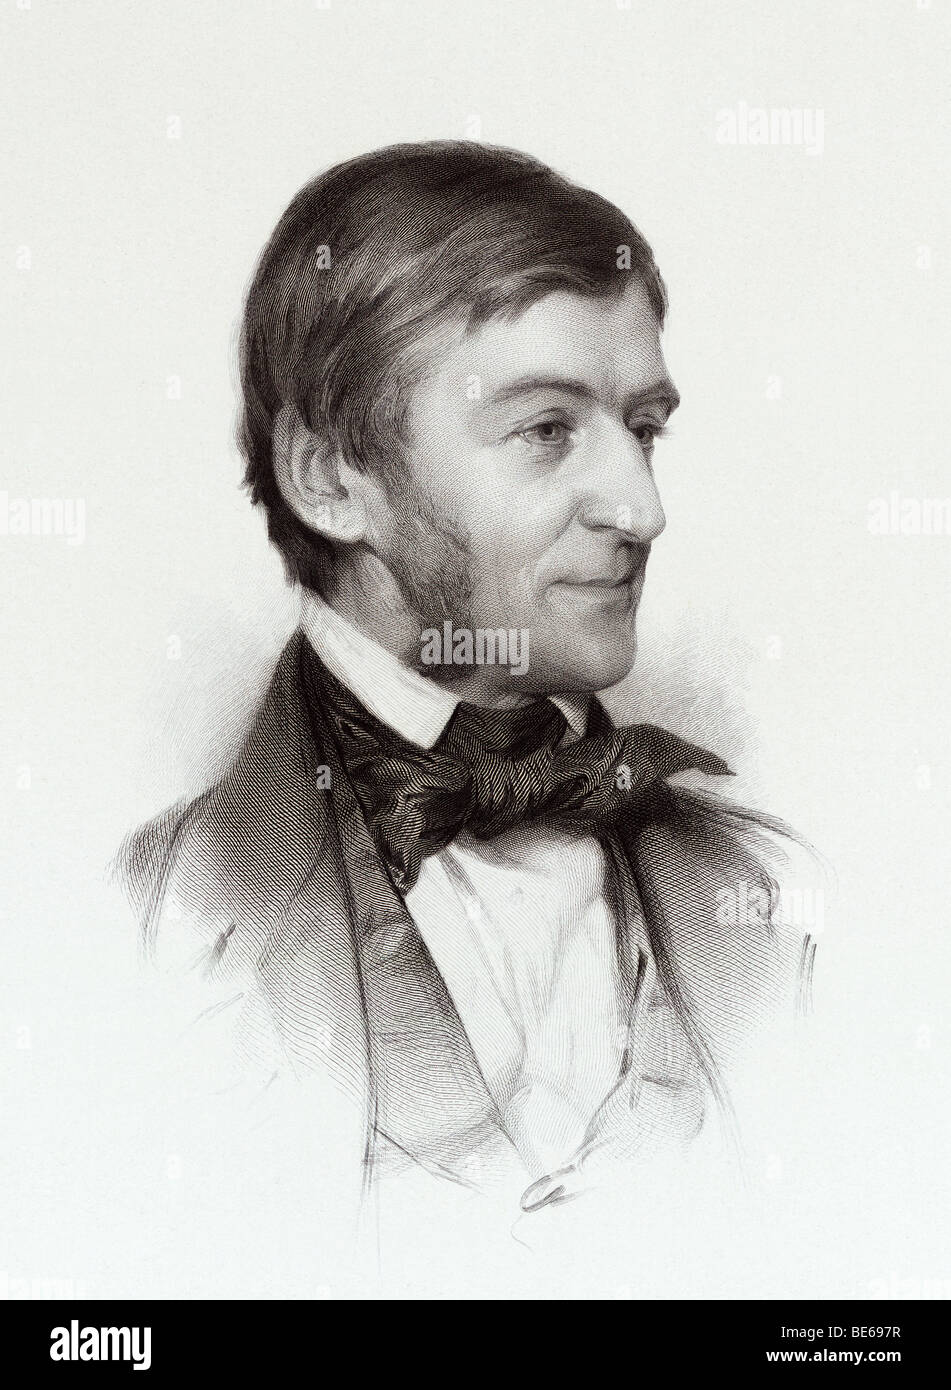 Portrait engraving circa 1878 by Stephen Alonzo Schoff, based on a drawing by Samuel Worcester Rowse, of Ralph Waldo Emerson. Stock Photo